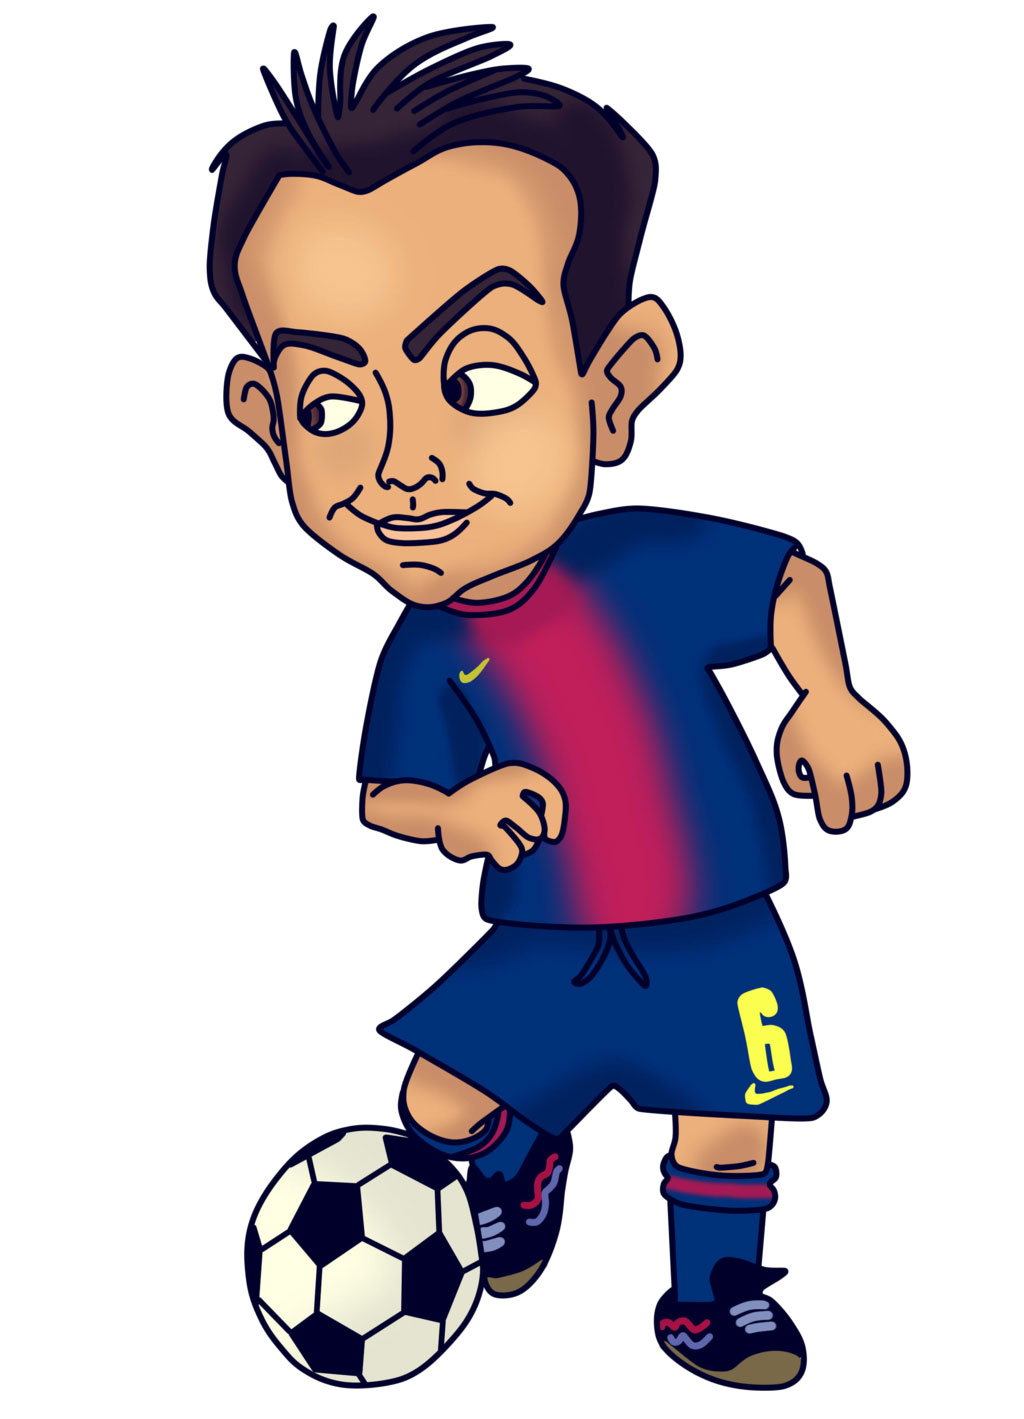 10 Funny Football Cartoon Pictures Free Cliparts That You Can Download